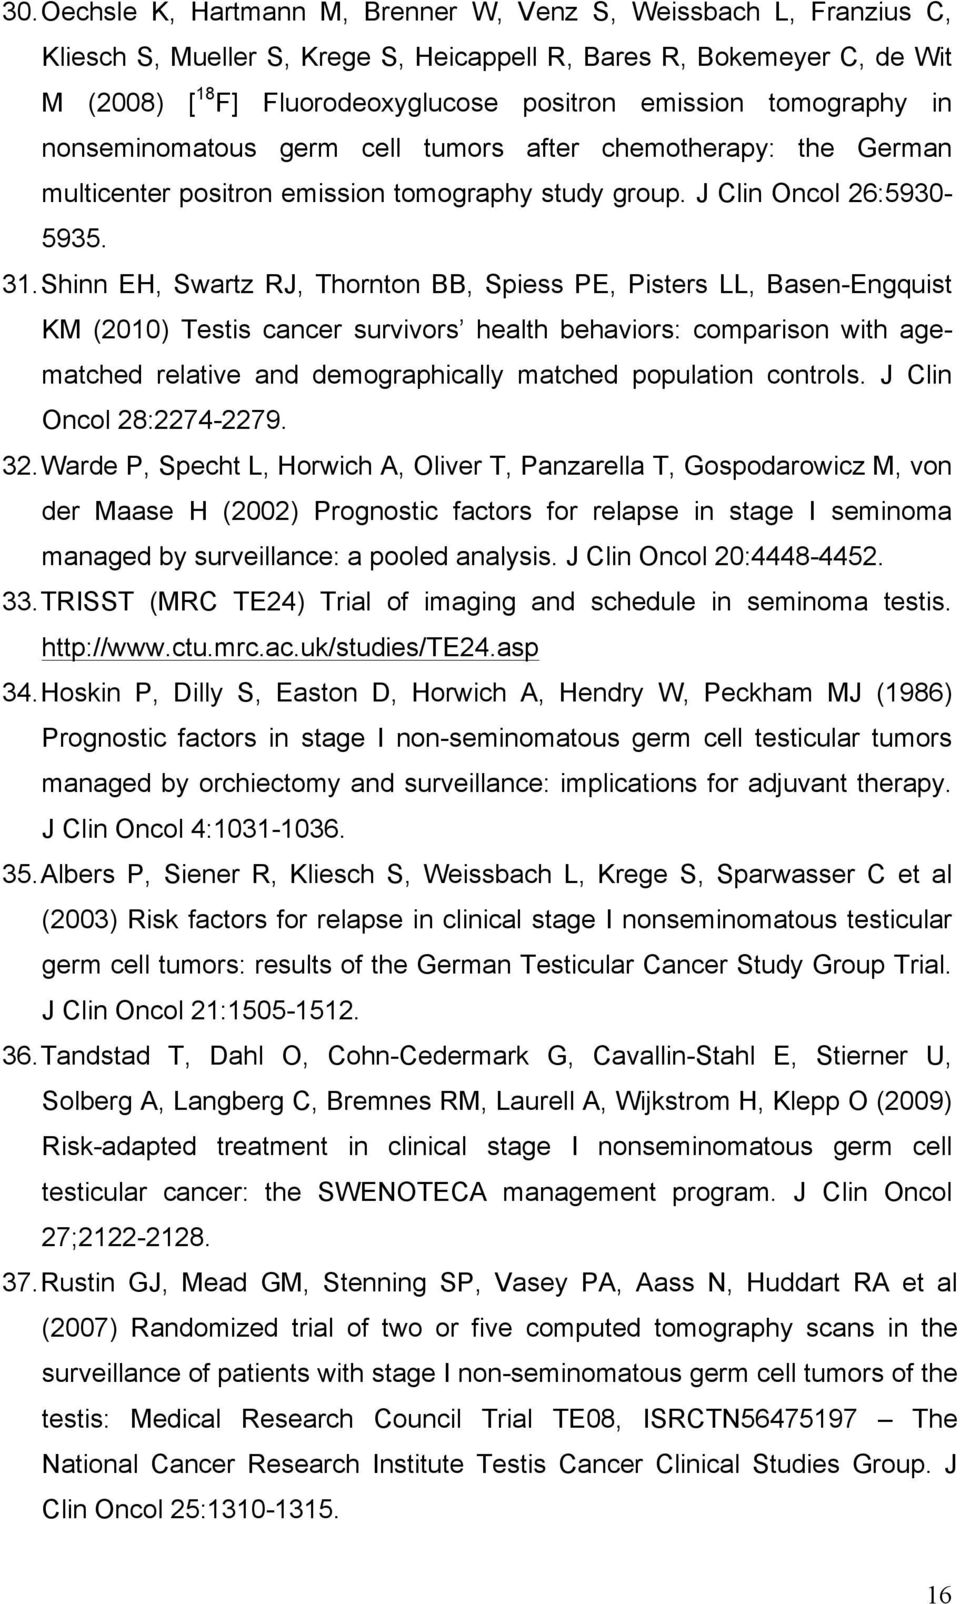 Shinn EH, Swartz RJ, Thornton BB, Spiess PE, Pisters LL, Basen-Engquist KM (2010) Testis cancer survivors health behaviors: comparison with agematched relative and demographically matched population